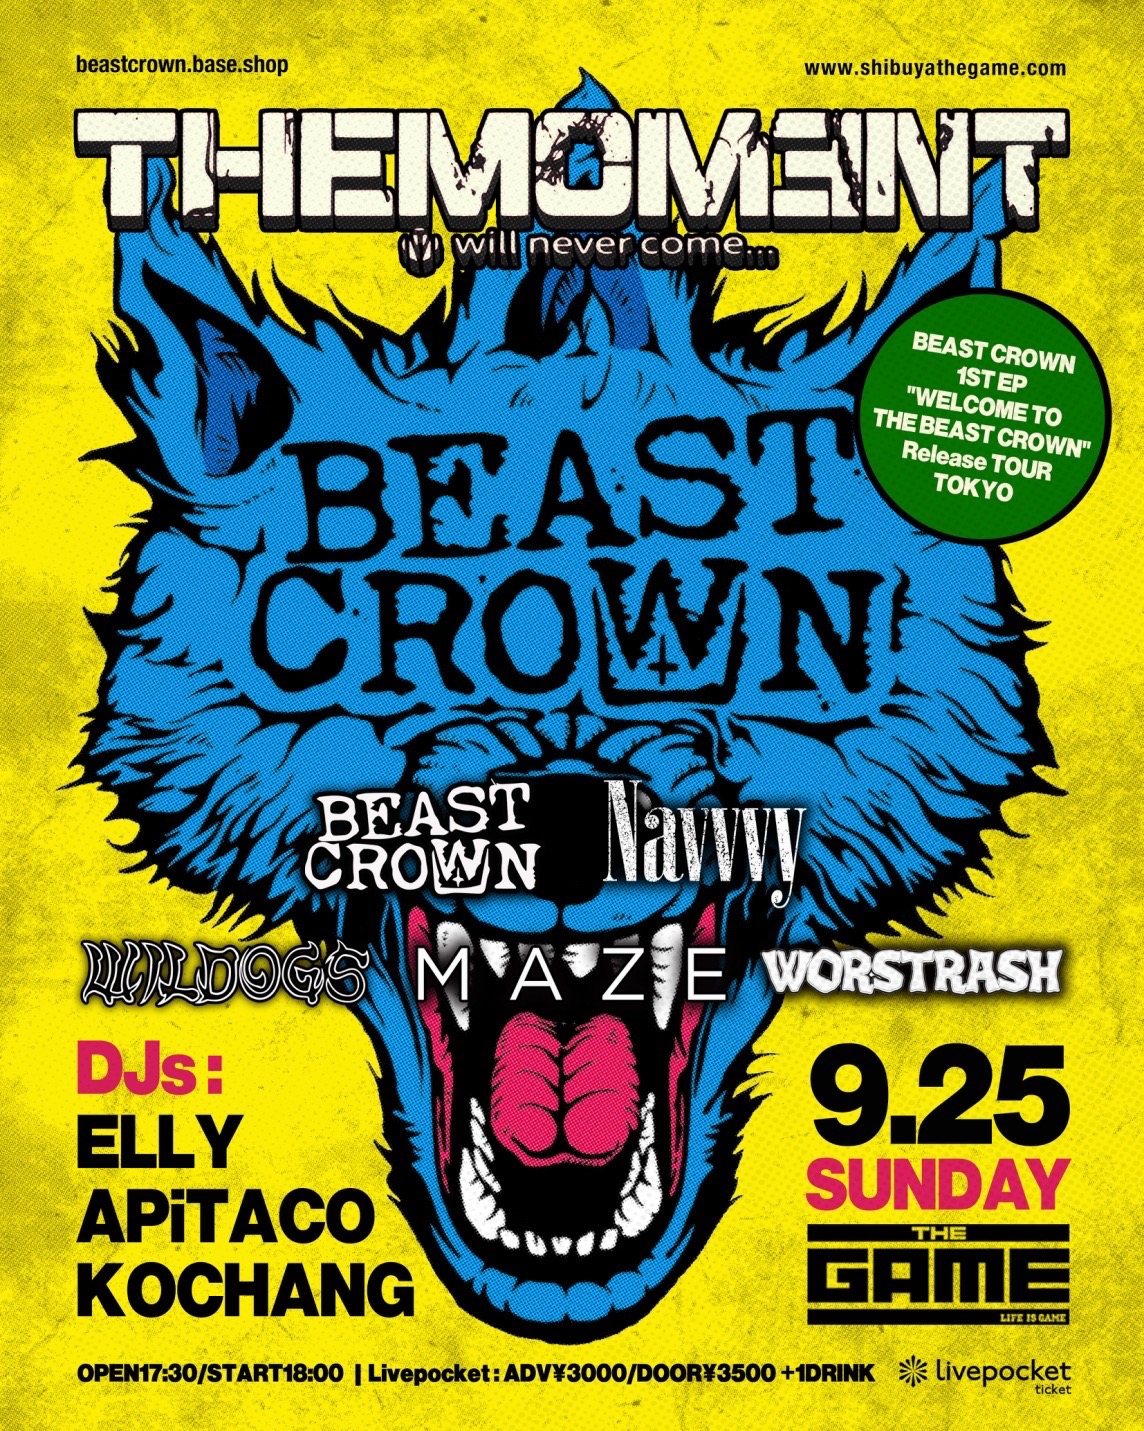 THEMOMENT ~BEAST CROWN 1ST EP"WELCOME TO THE BEAST CROWN" Release TOUR TOKYO~